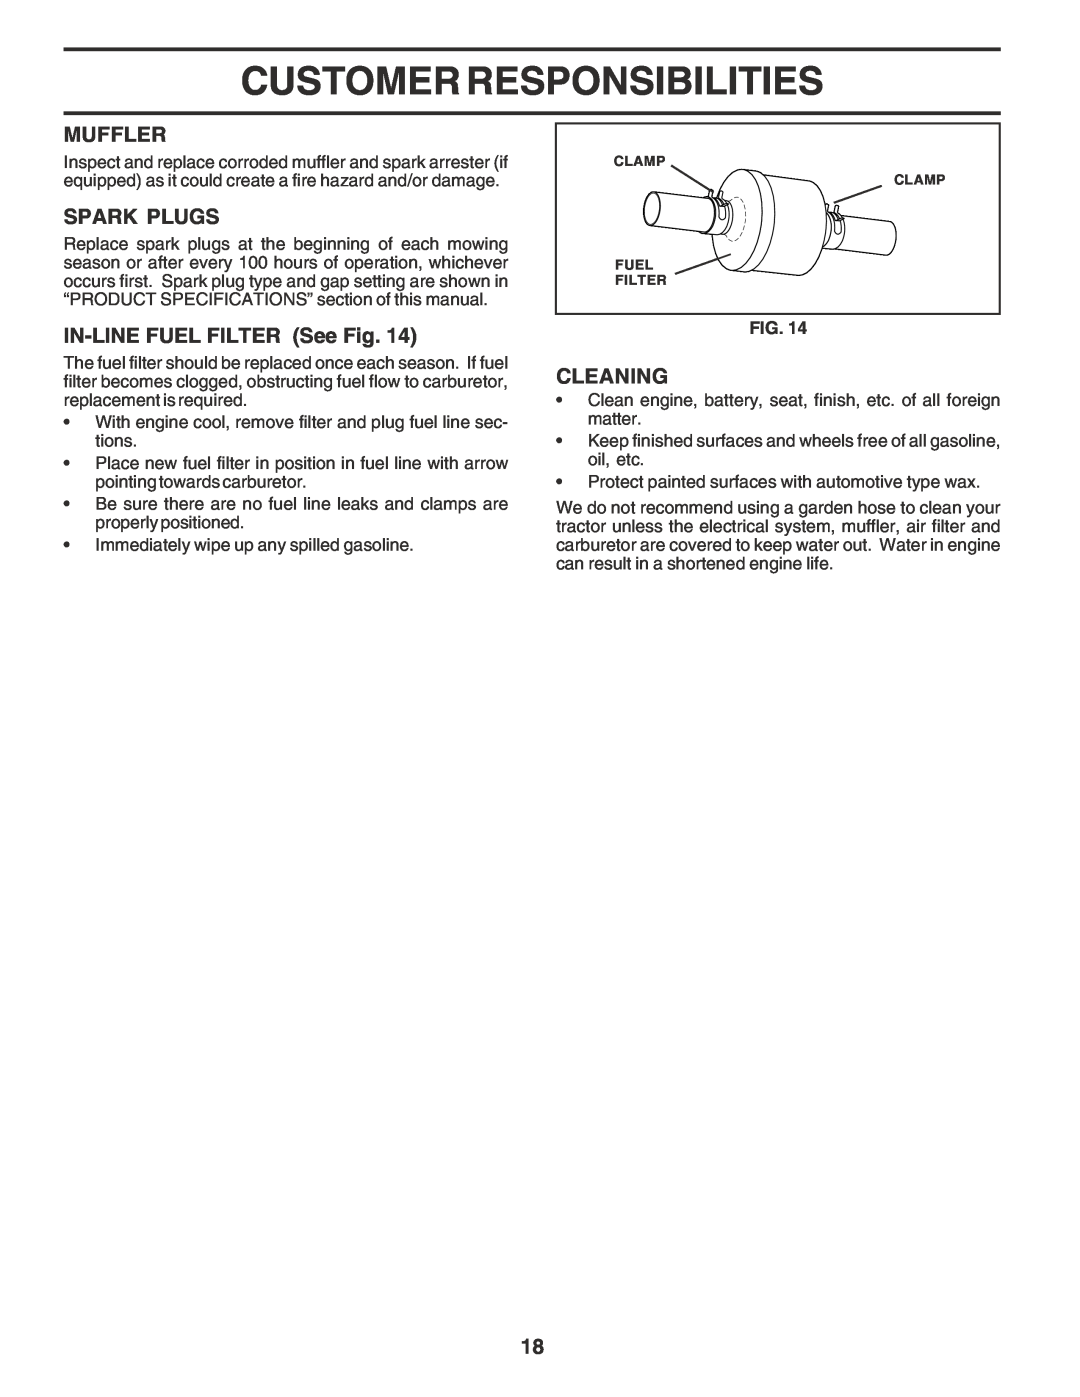 Poulan PO1538B manual Muffler, Spark Plugs, IN-LINE FUEL FILTER See Fig, Cleaning, Customer Responsibilities 